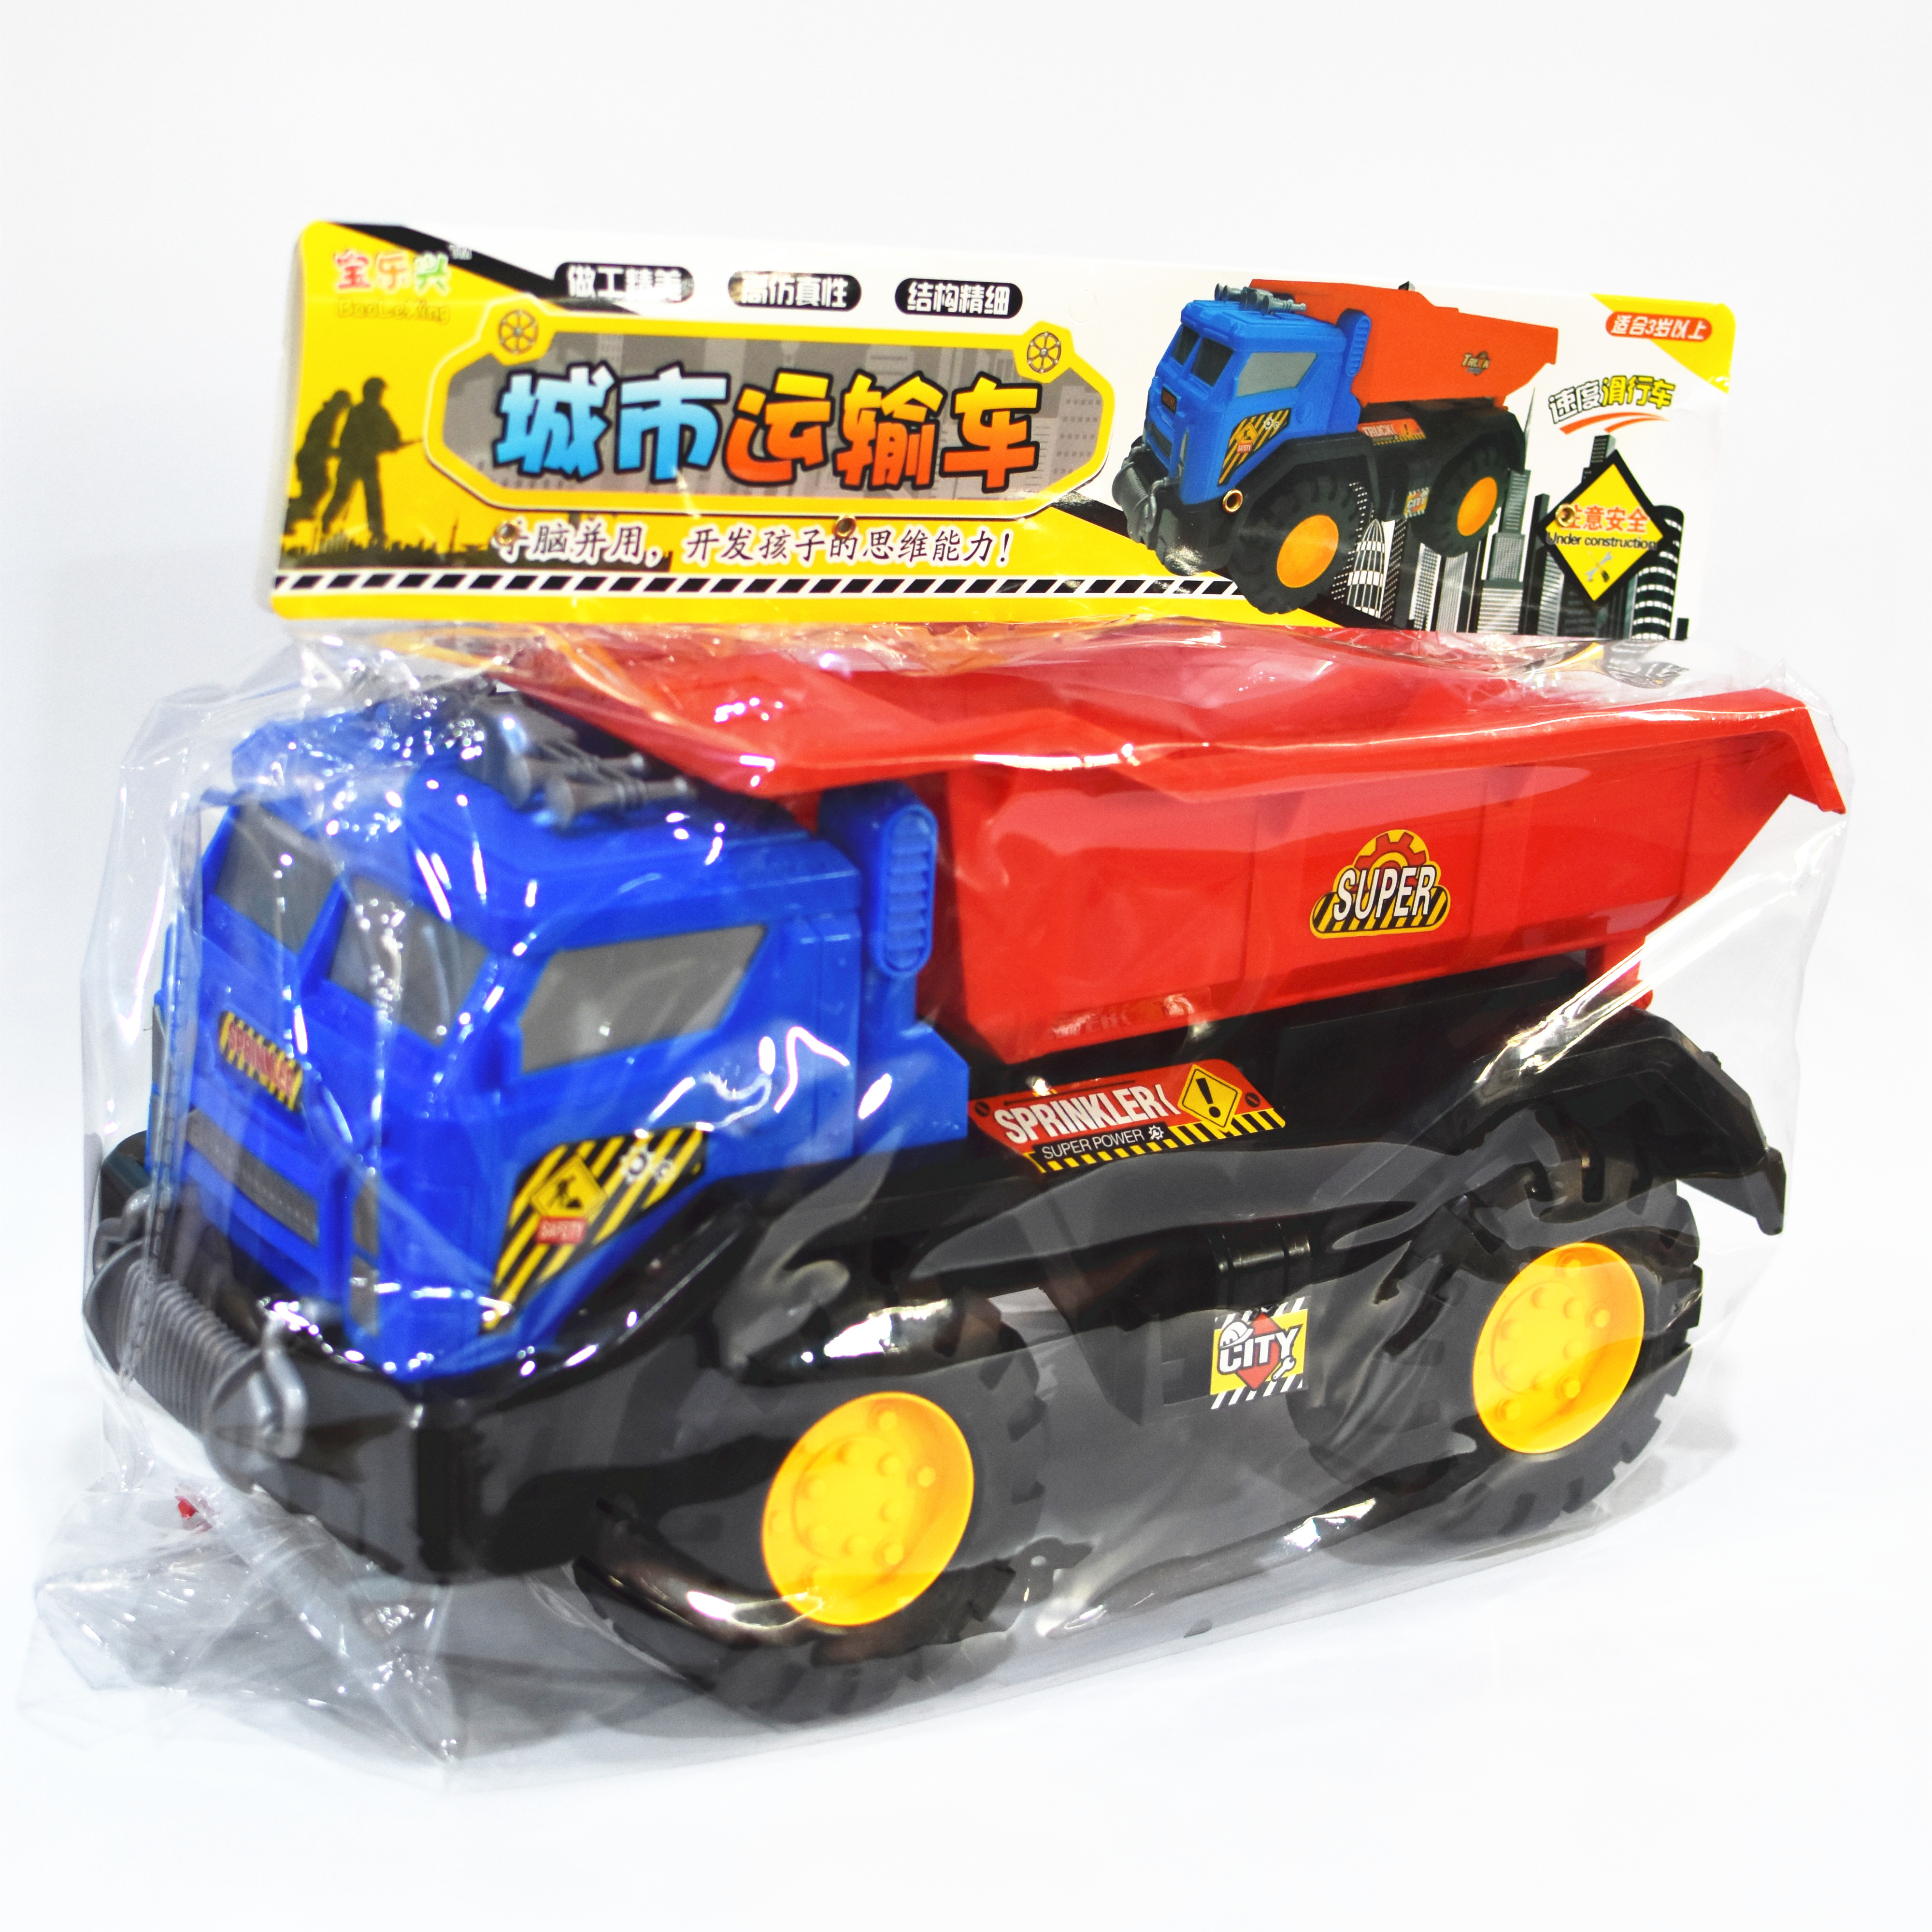 FREE WHEEL TRUCK TOY LY1359